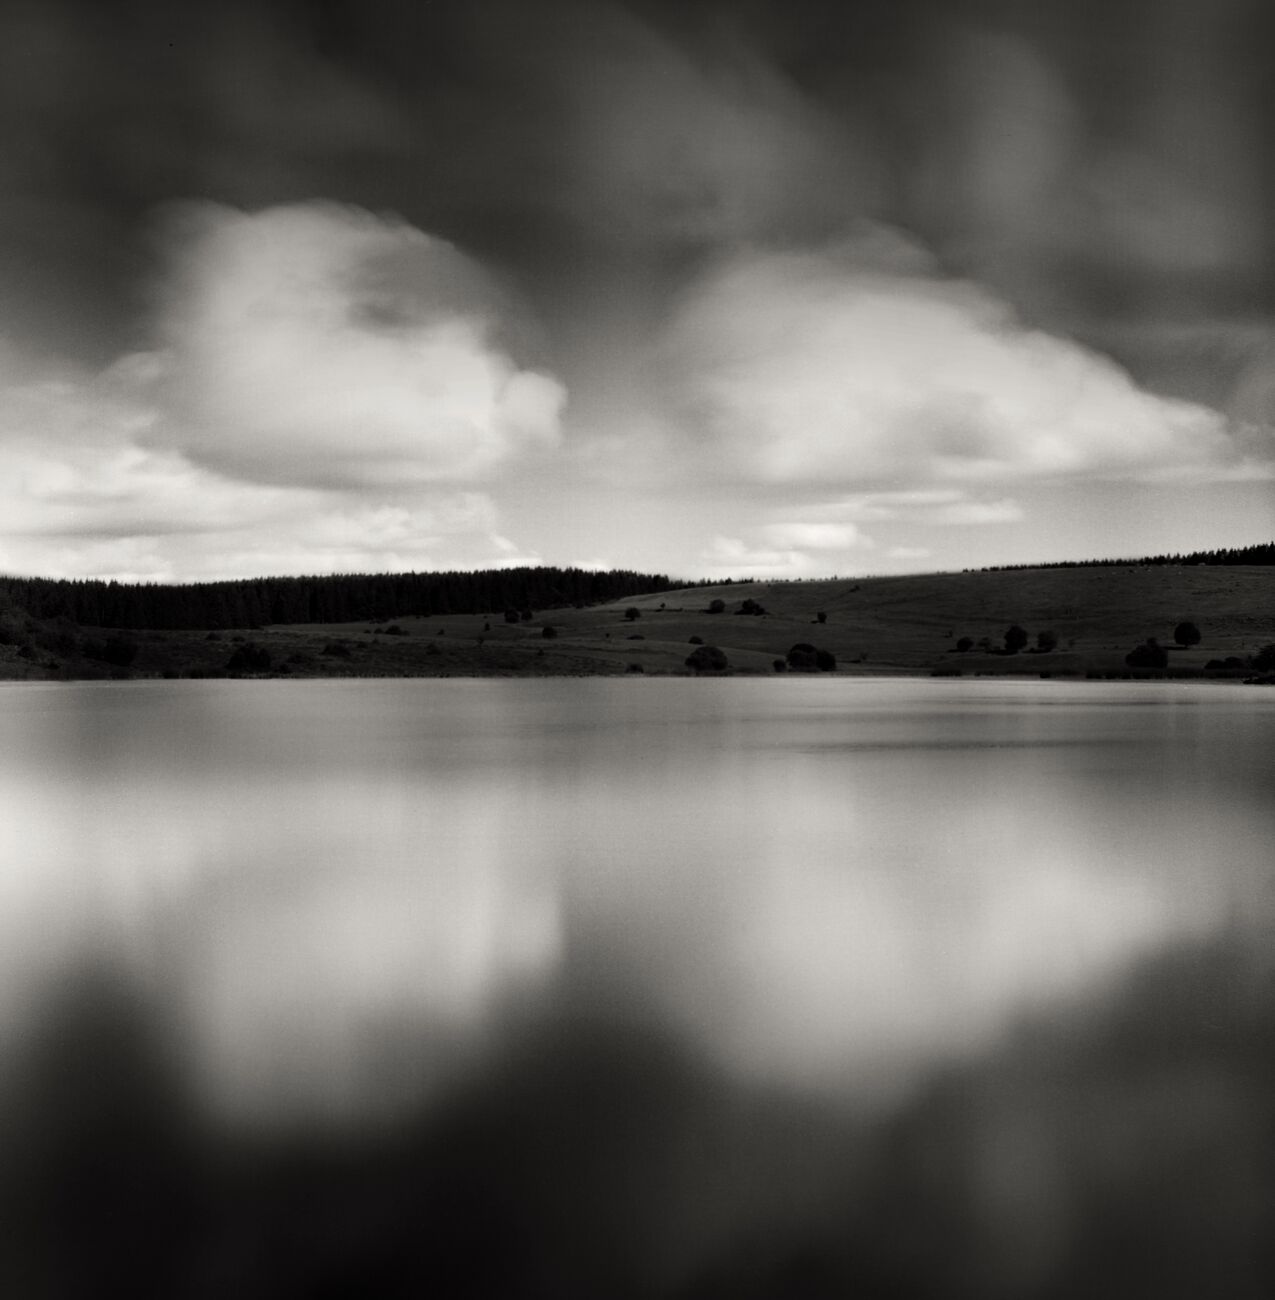 Reflecting Clouds, Sauvages Lake, France. August 2020. Ref-1422 - Denis Olivier Photography